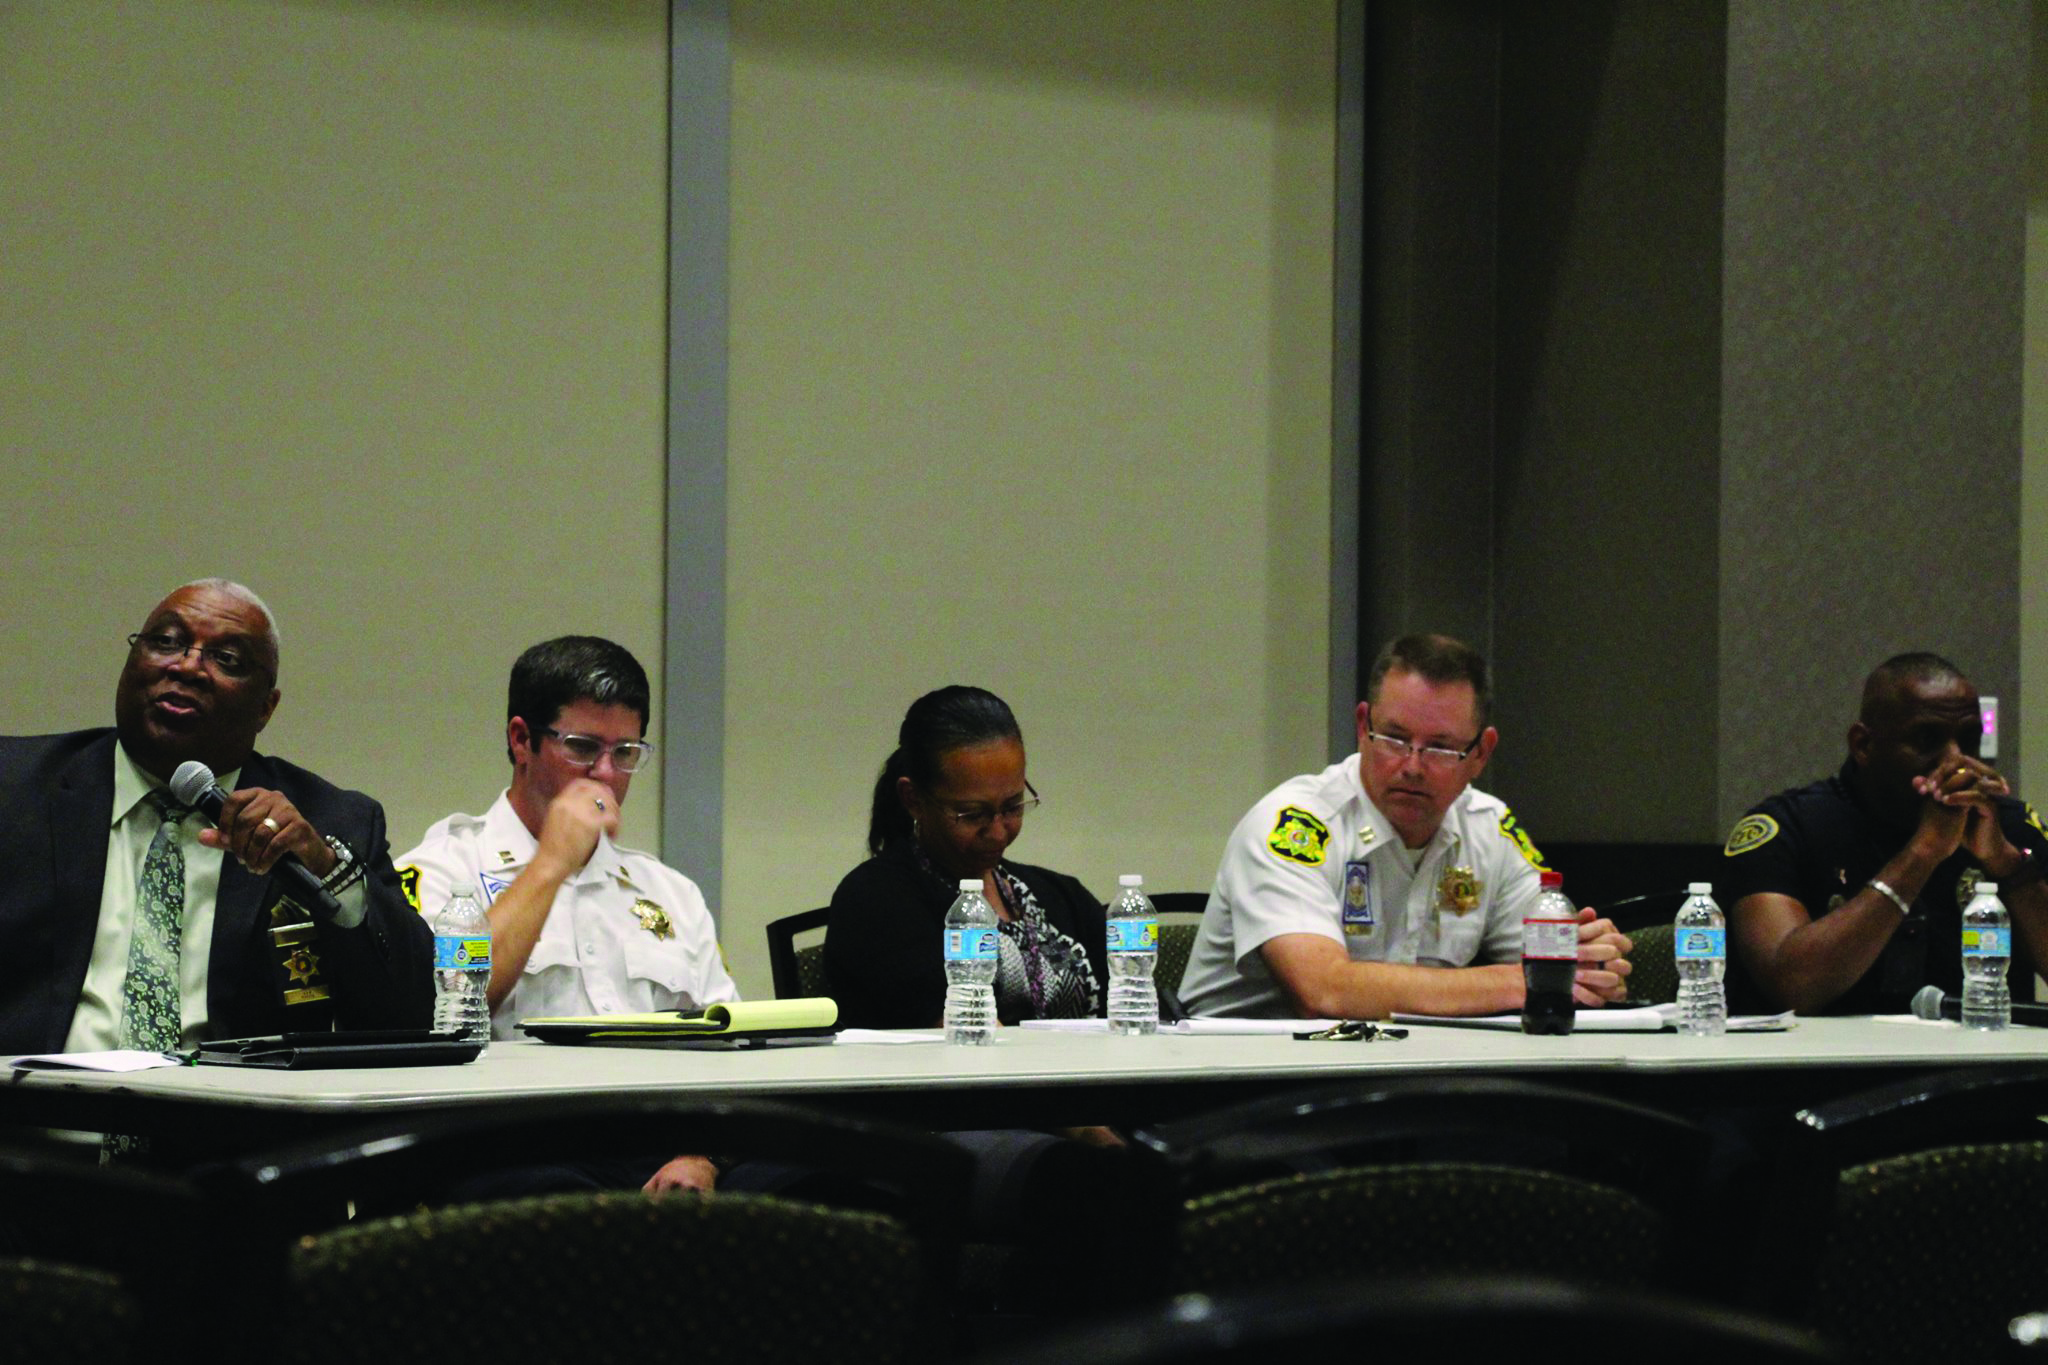 Four members of the UABPD and one Birmingham City Police officer [not pictured] answer questions about issues and finding solutions to the national tension between officers and African-Americans.  Photo by Marika Gray